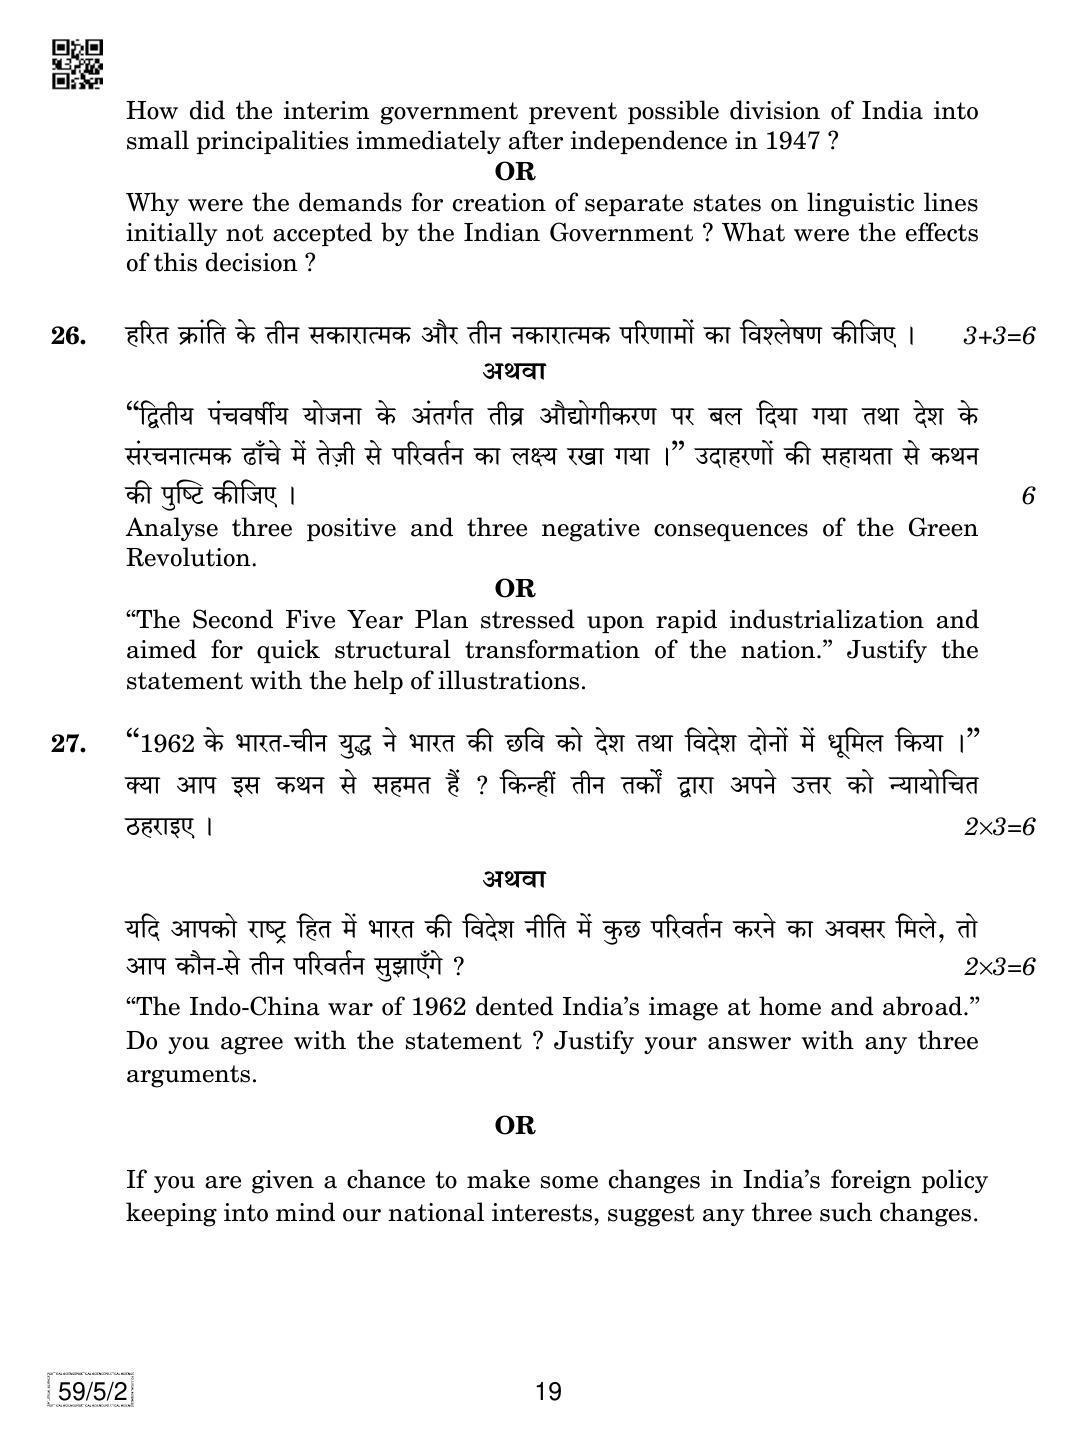 CBSE Class 12 59-5-2 Political Science 2019 Question Paper - Page 19